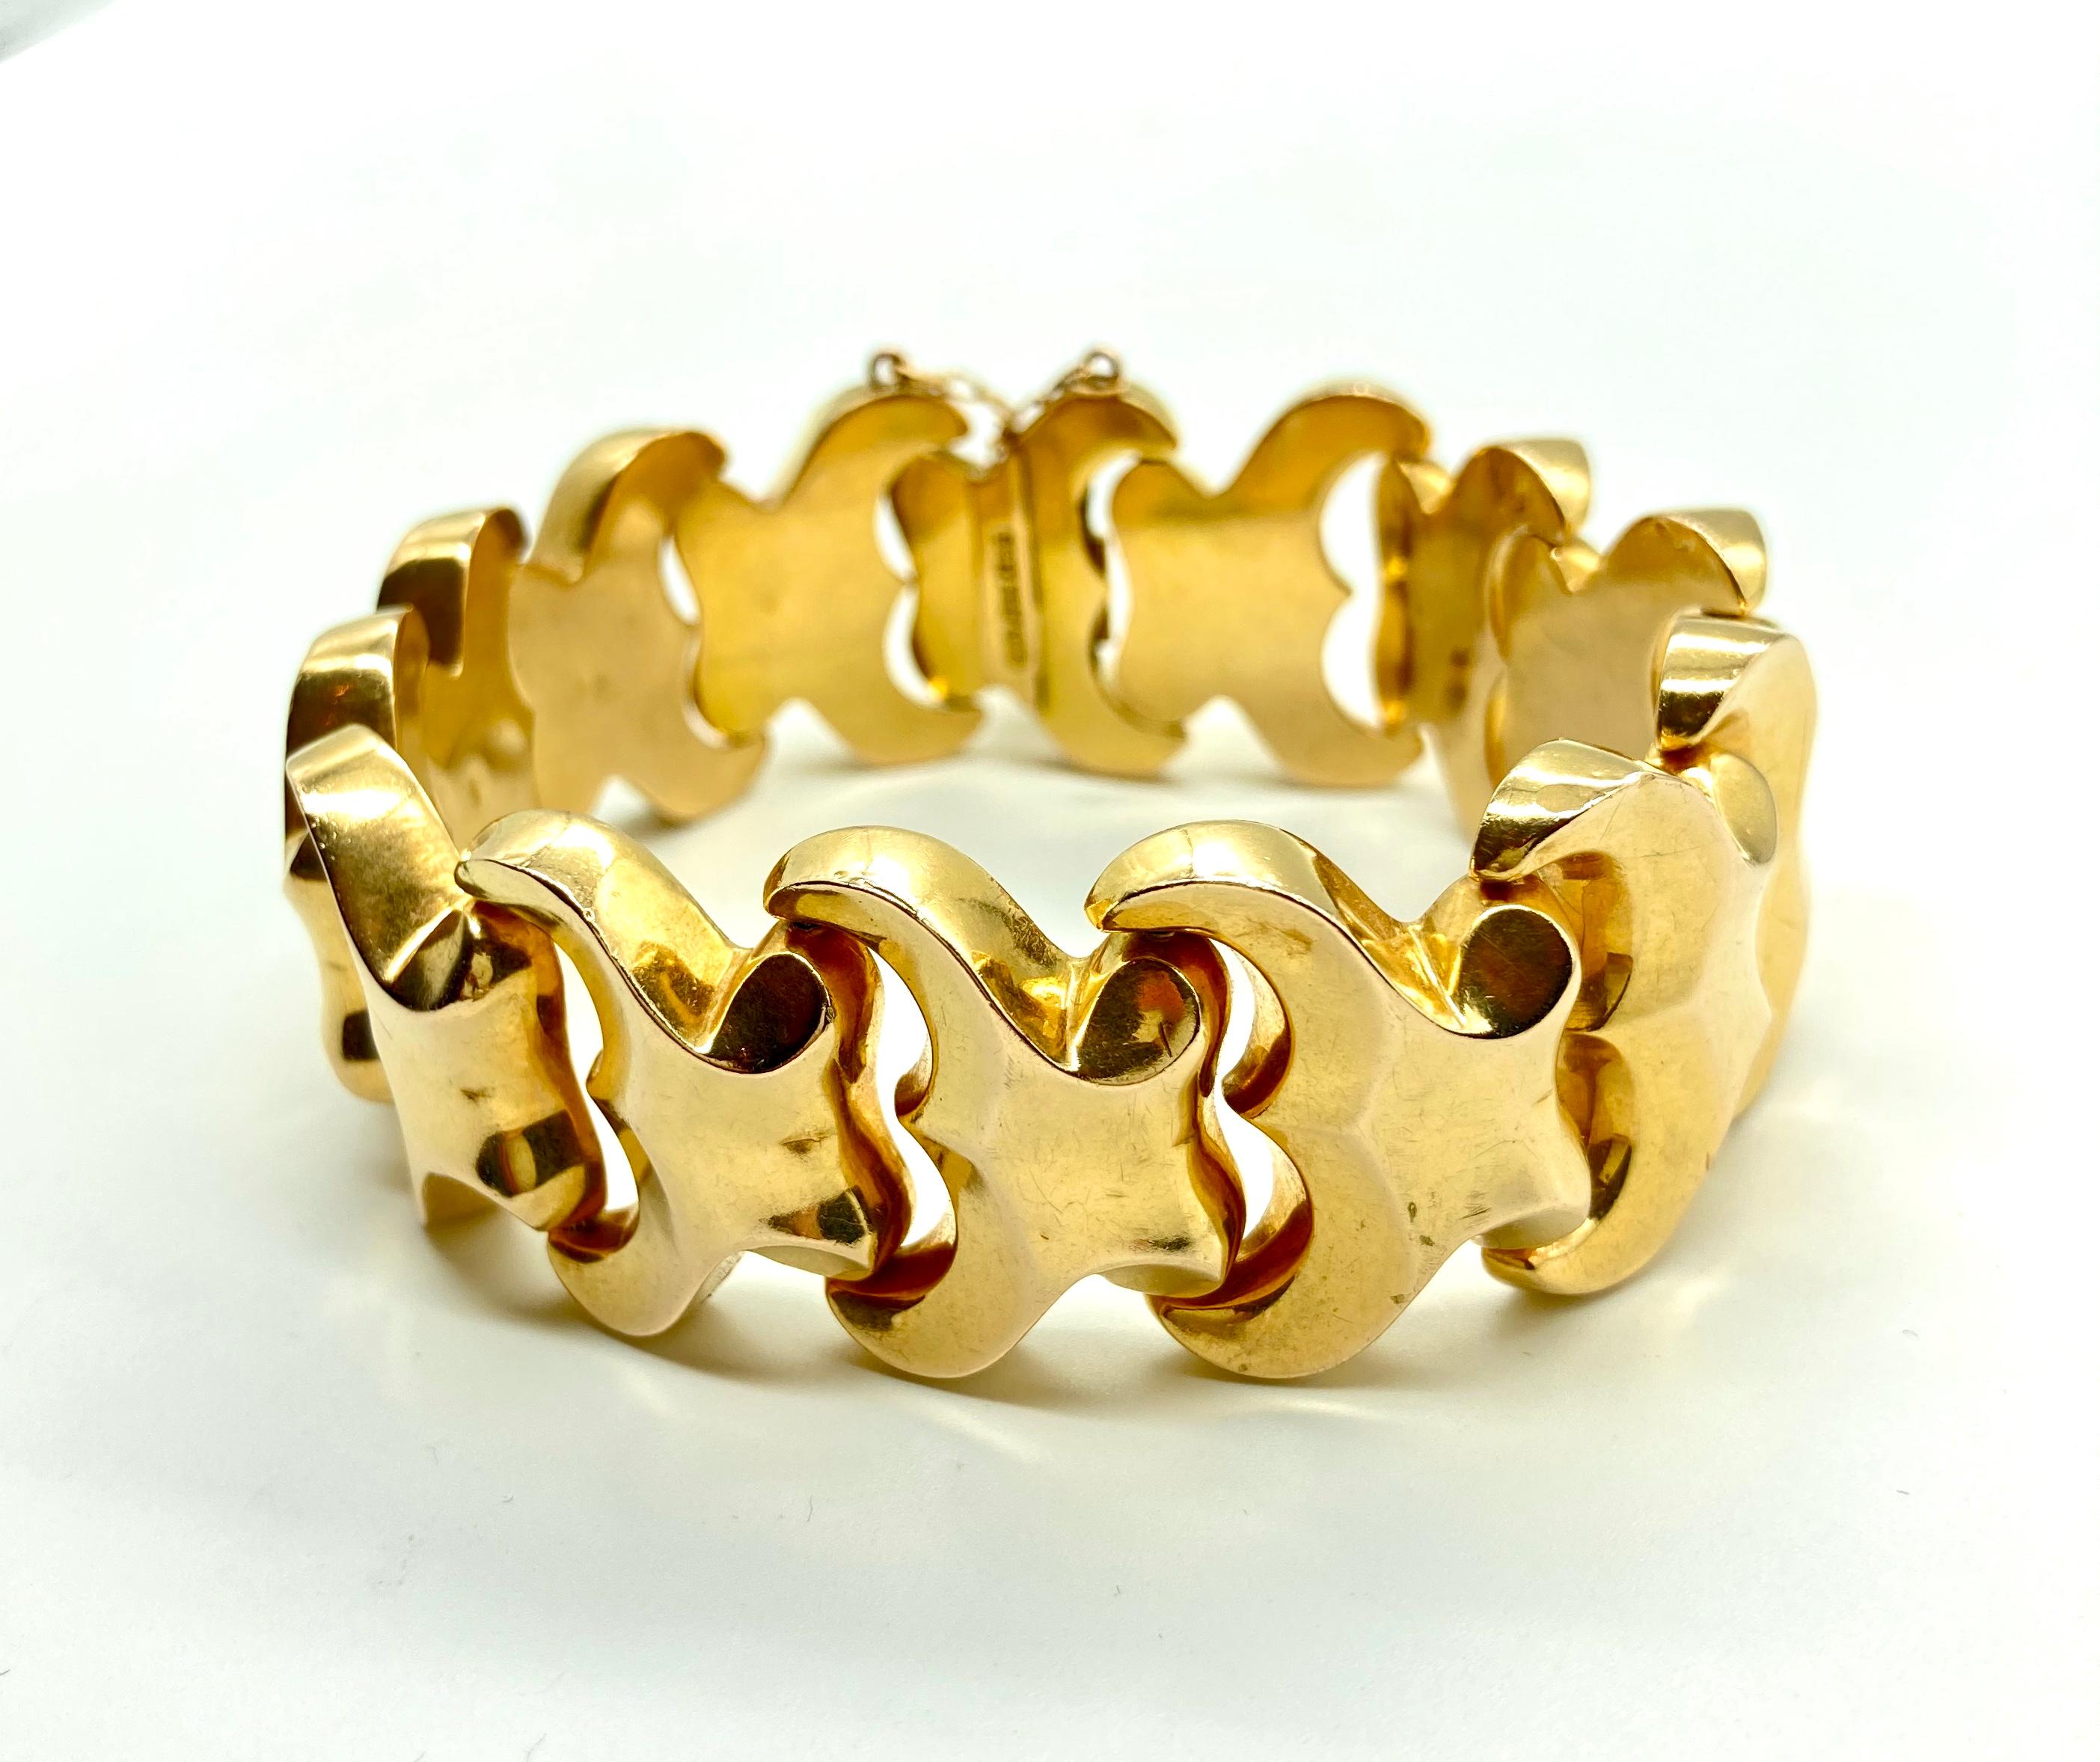 A chic 18 karat yellow gold bracelet of wavy design. Made in Italy, circa 1970s.